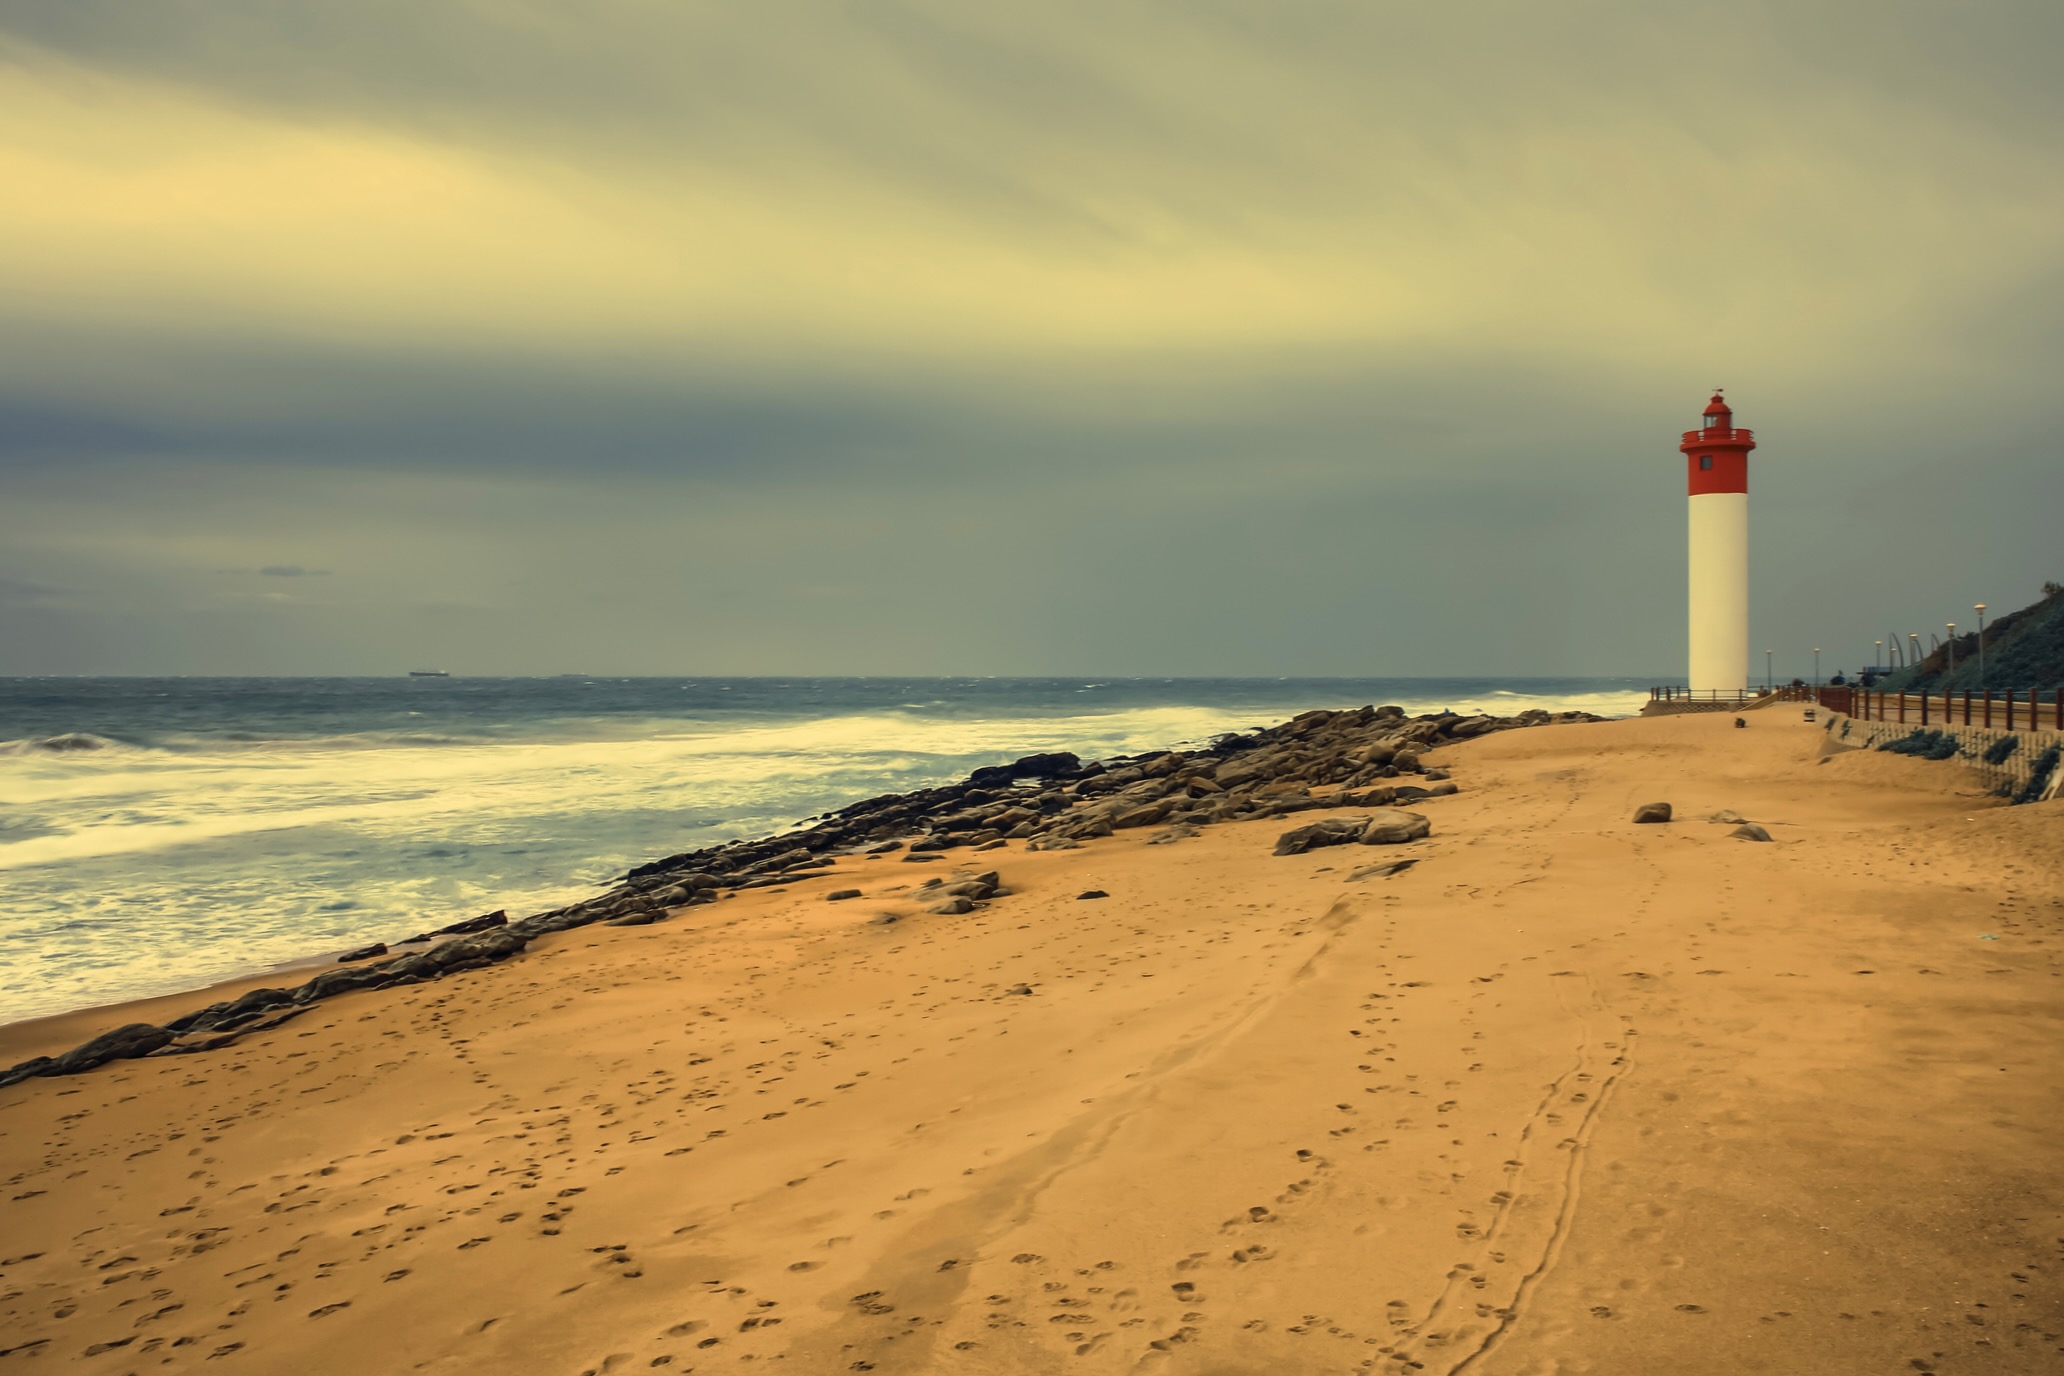 Experience South Africa’s beautiful landscape like this sandy shoreline in Umhlanga Rocks when you take a tailor-made holiday with Alfred&.